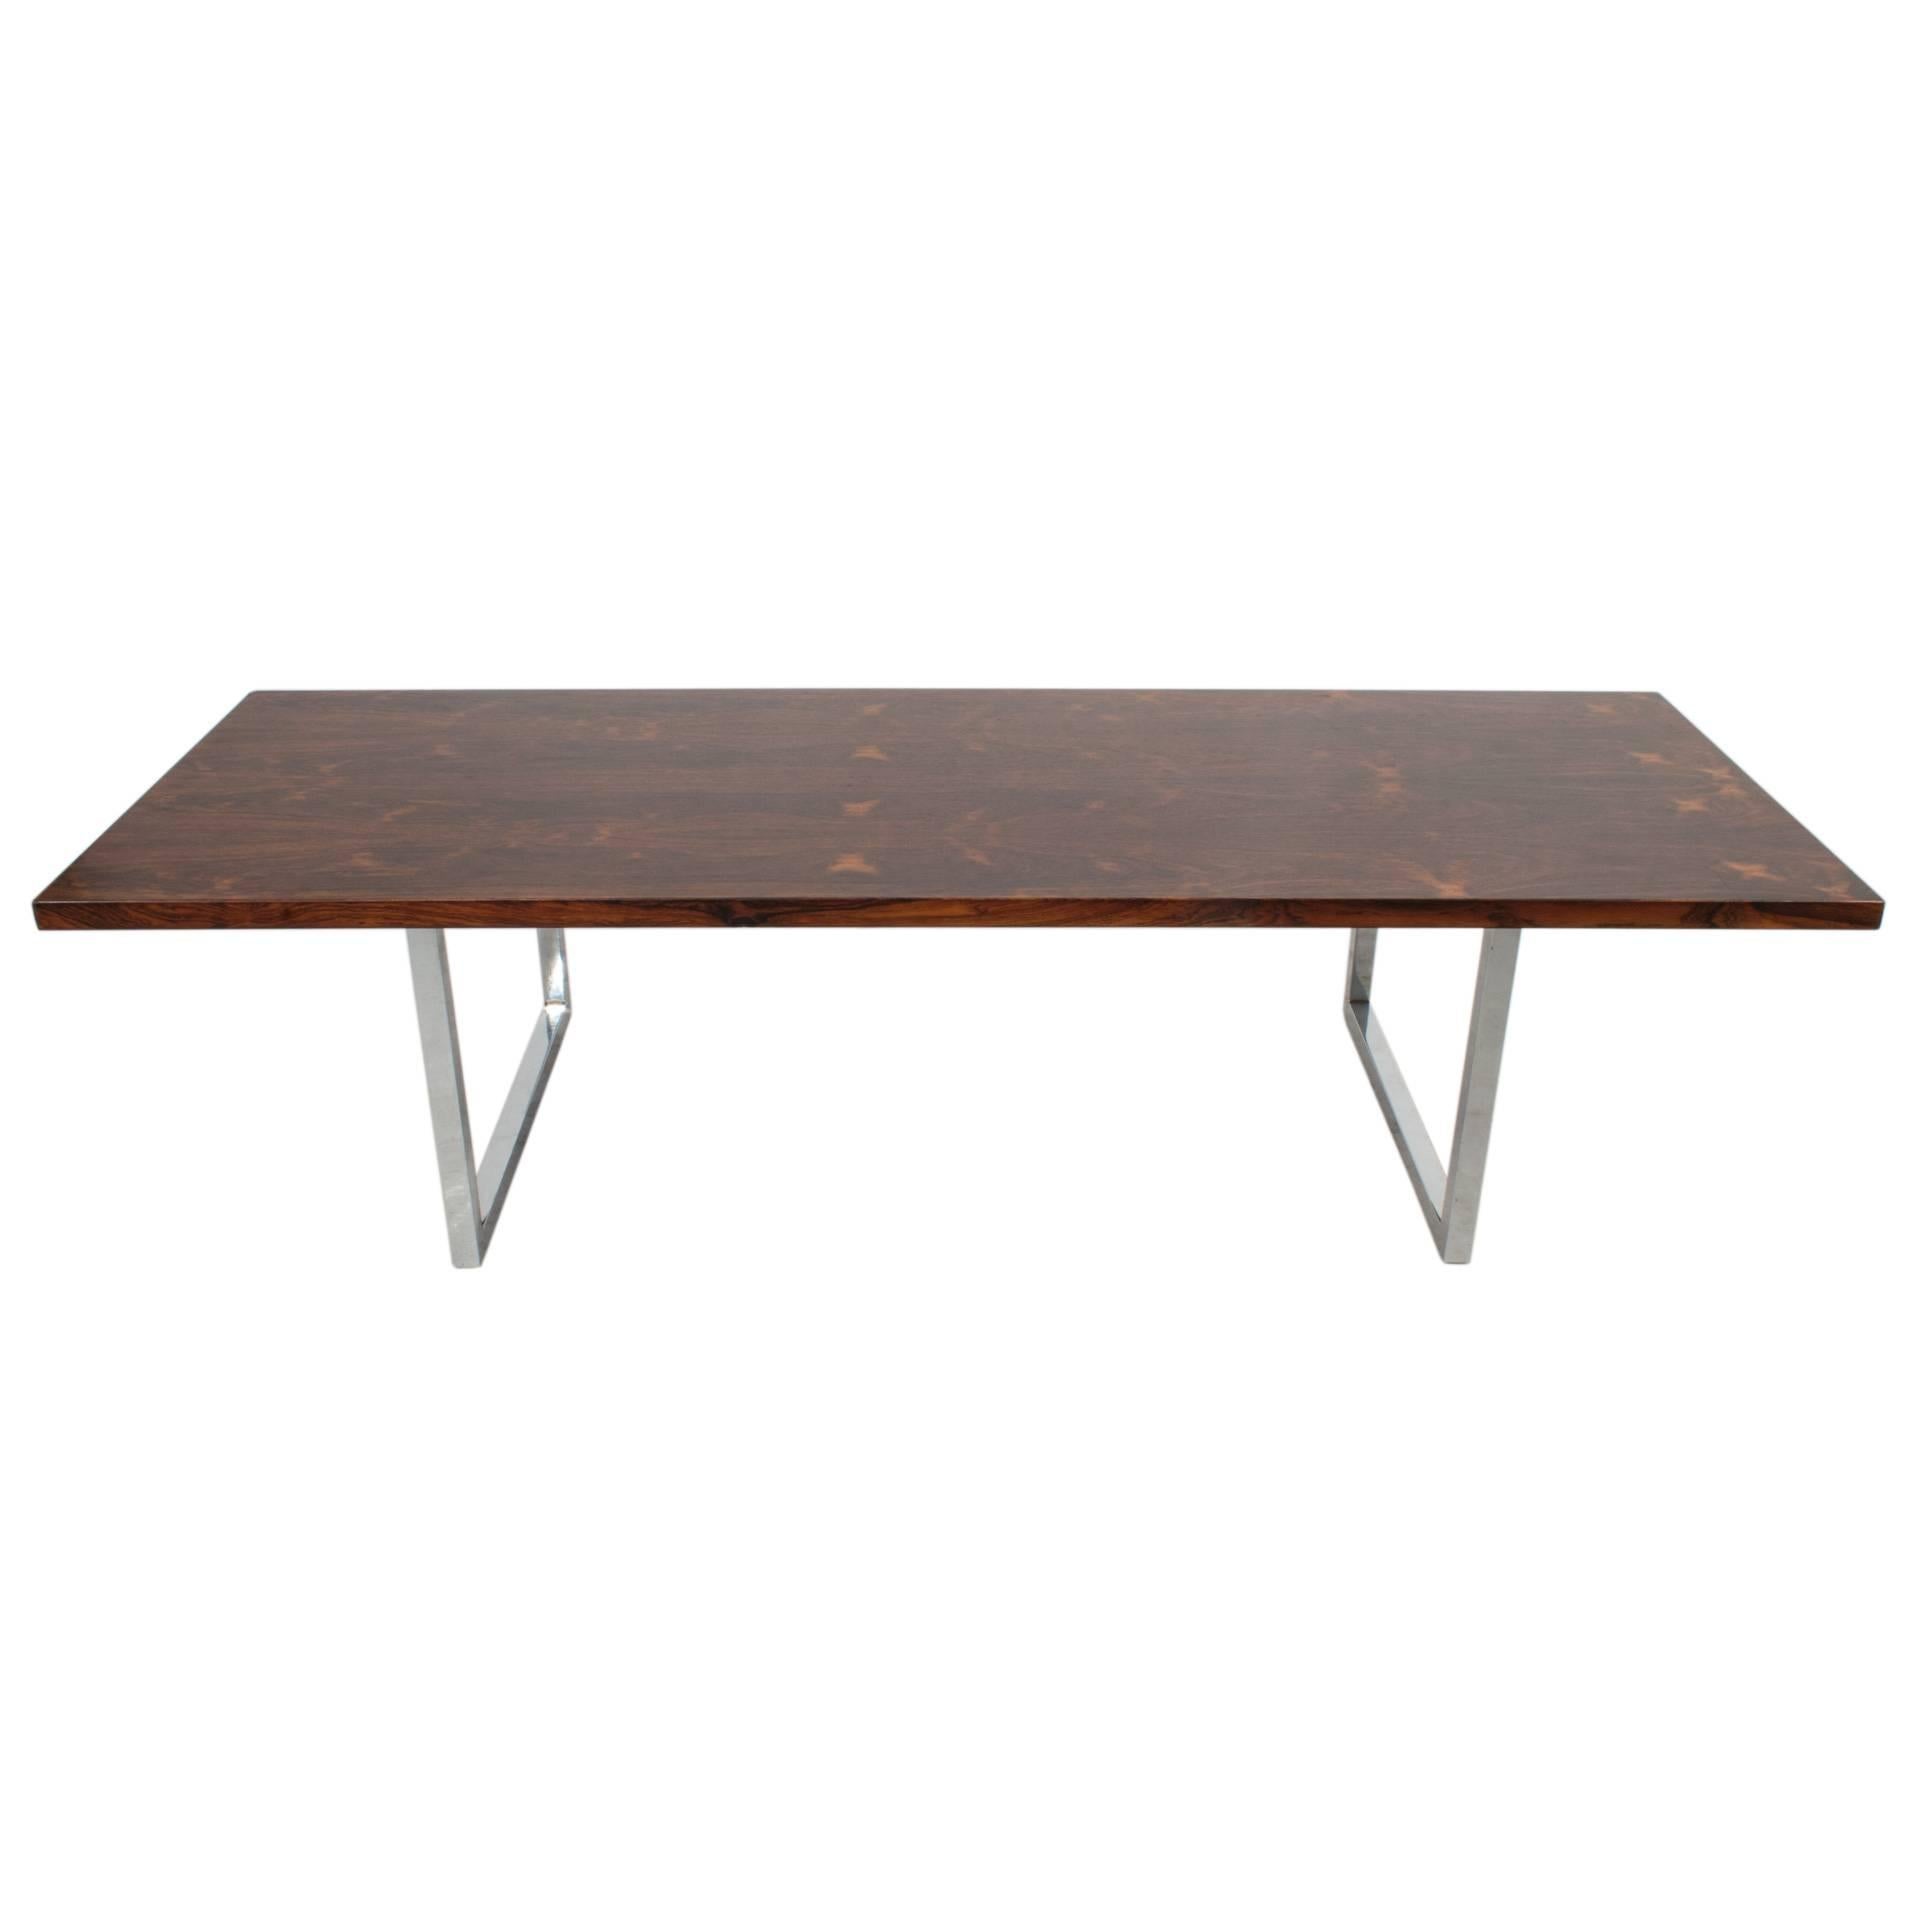 Coffee table with top in rosewood and base in steel by Bodil Kjaer.